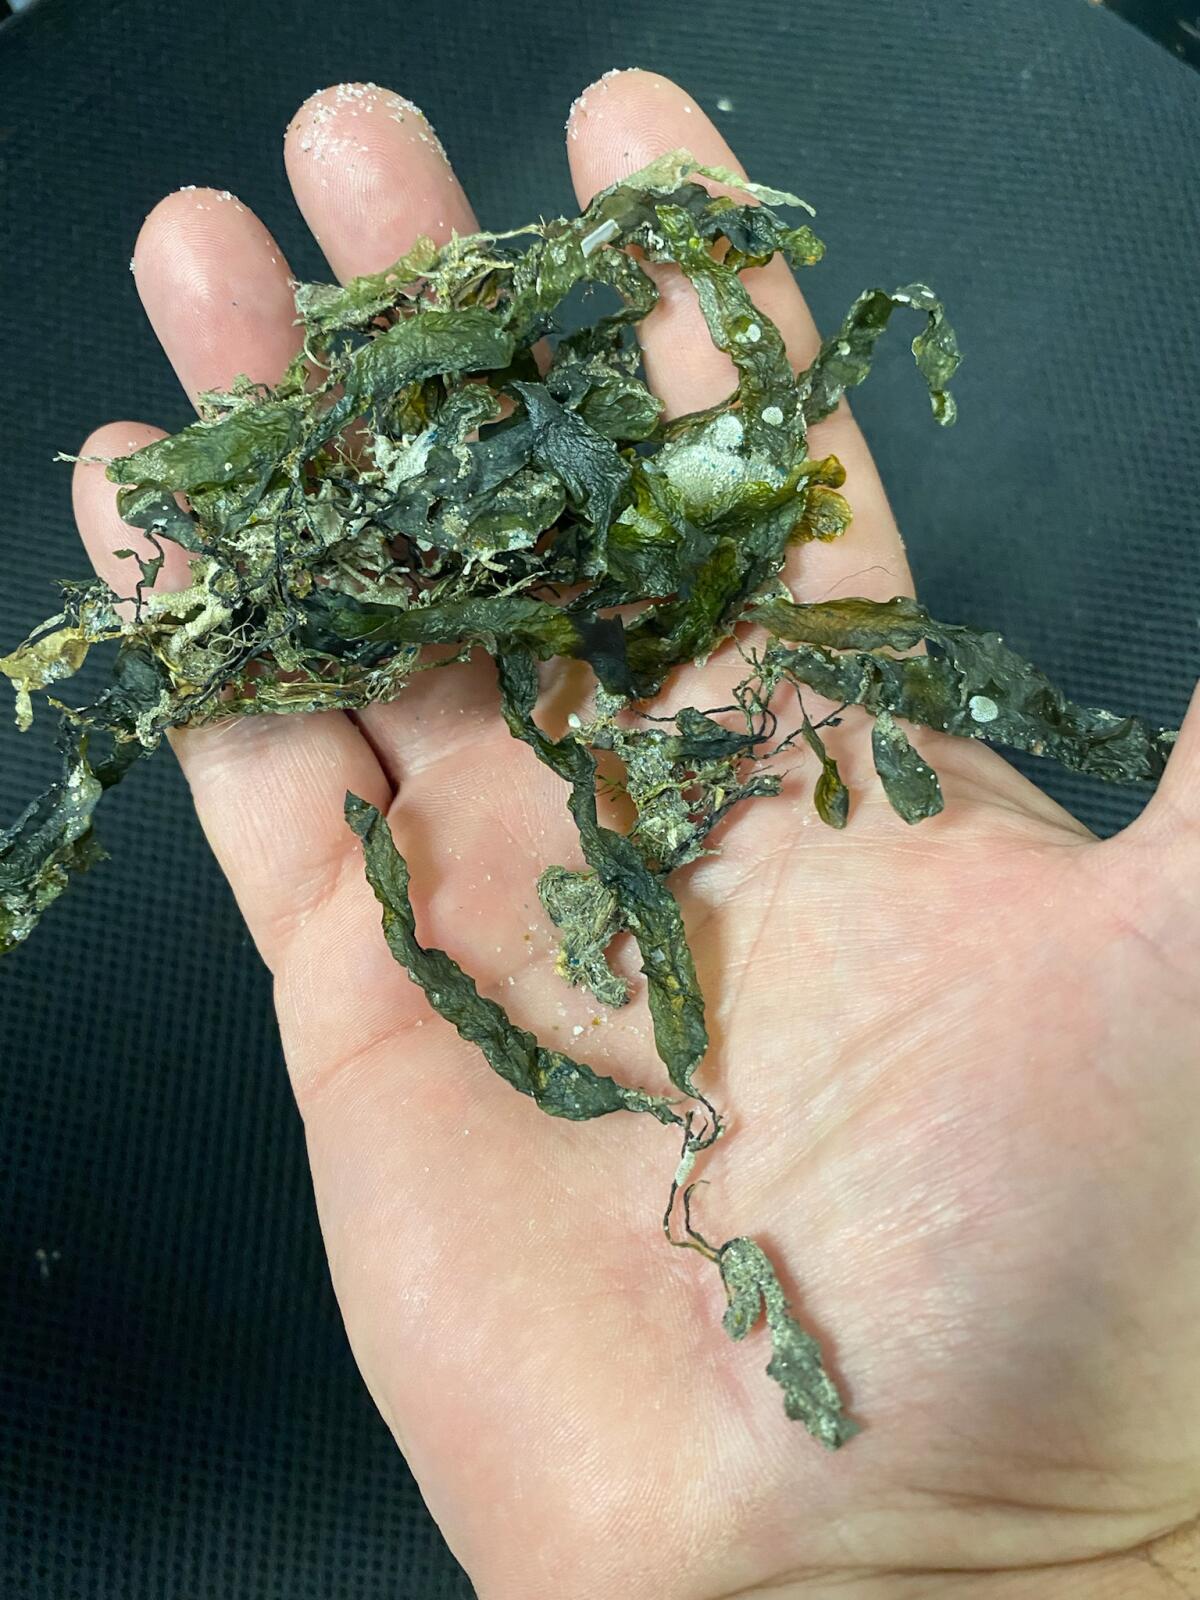 Caulerpa prolifera is an invasive species found in the waters of Newport Bay.